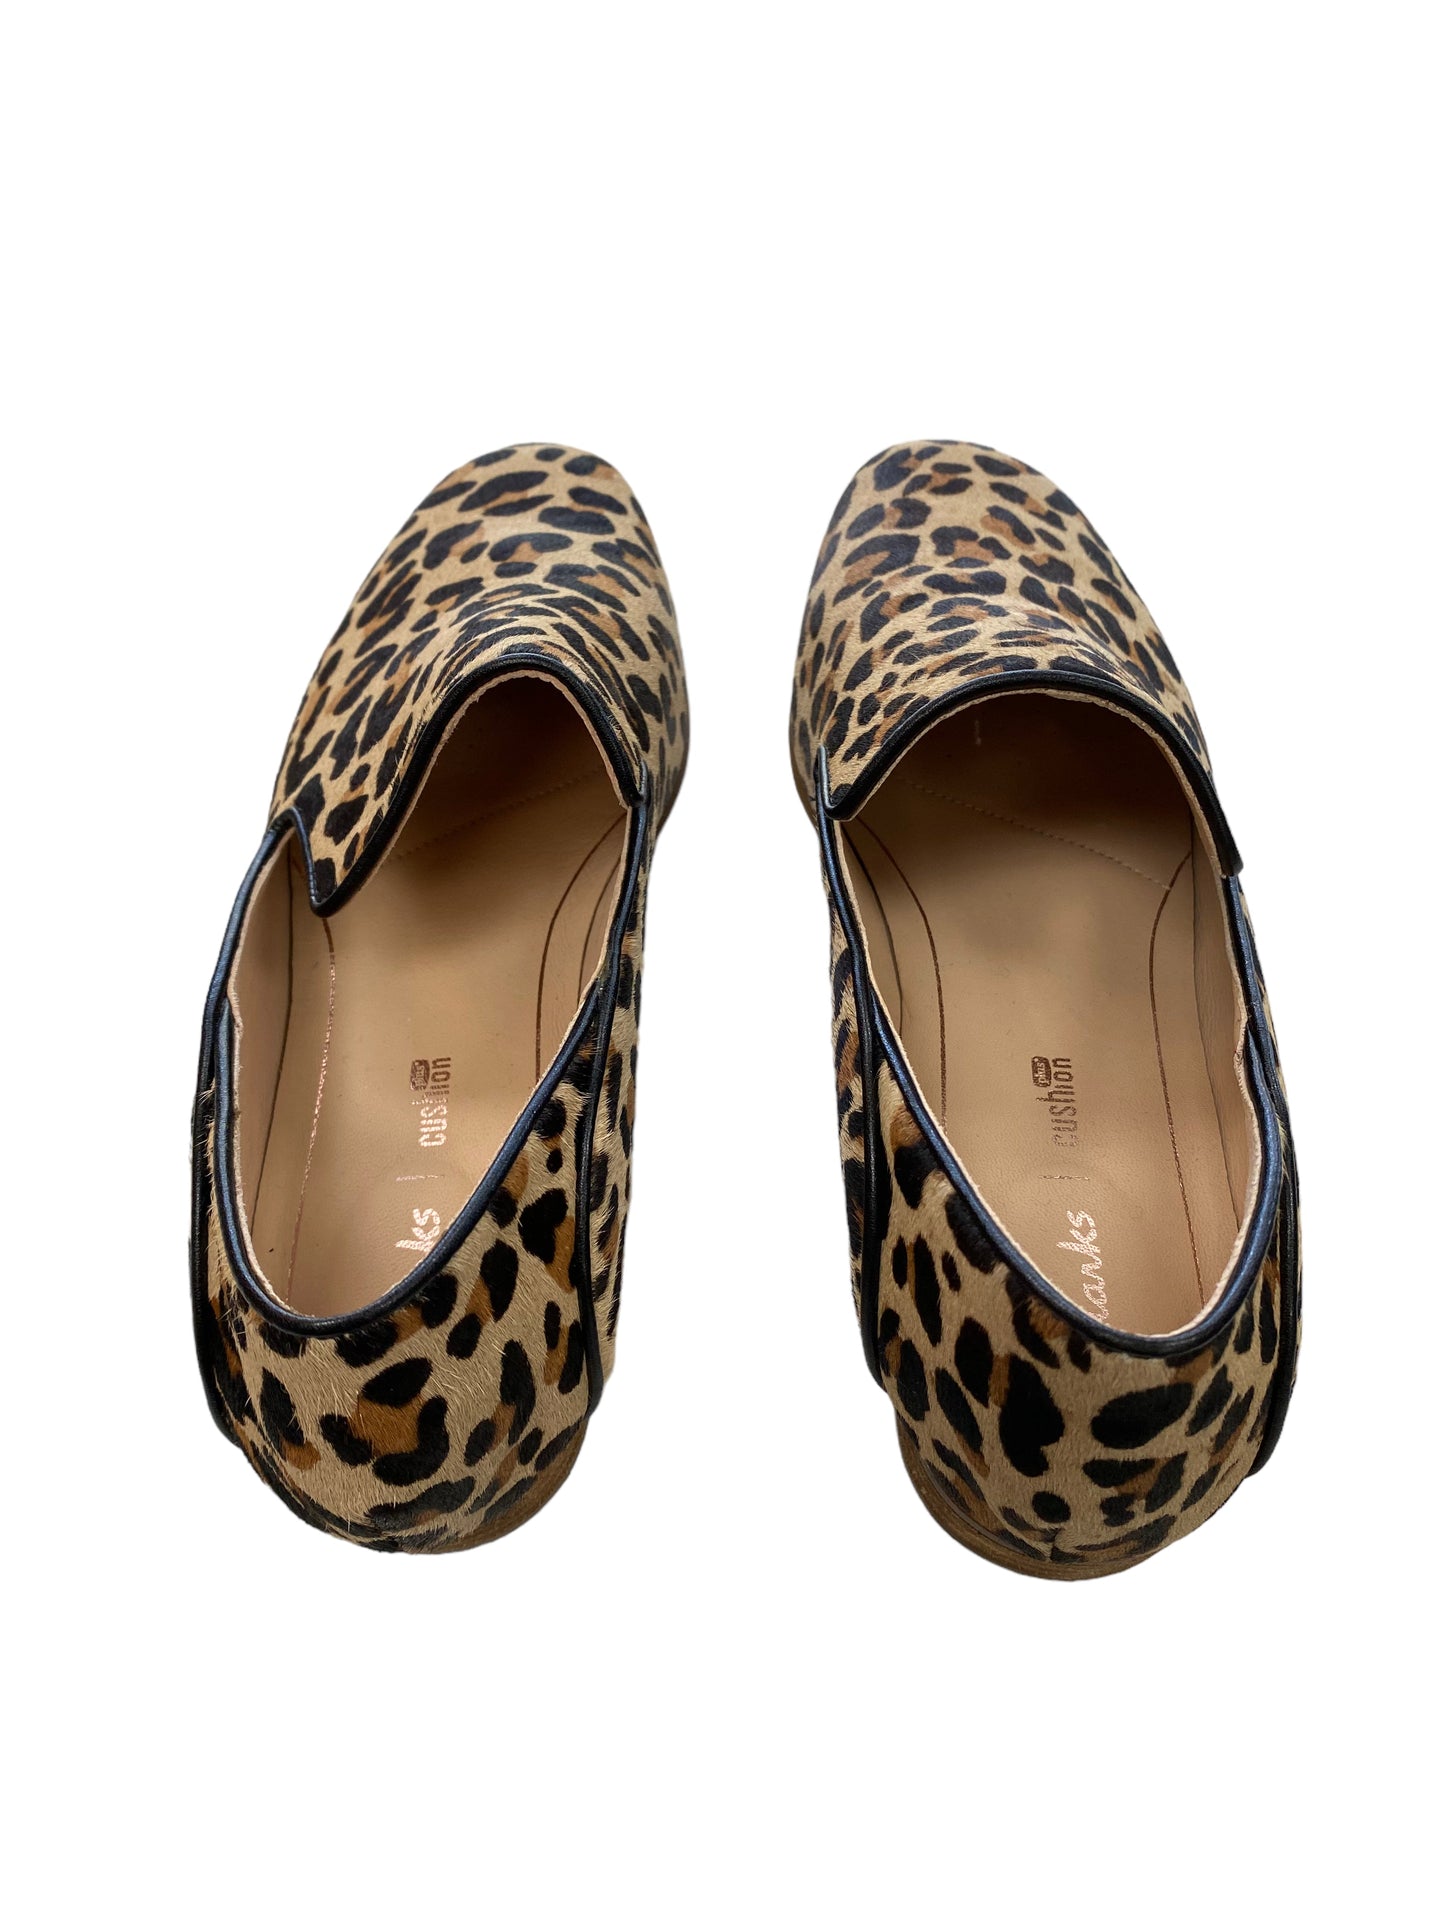 Animal Print Shoes Flats Clarks, Size 7